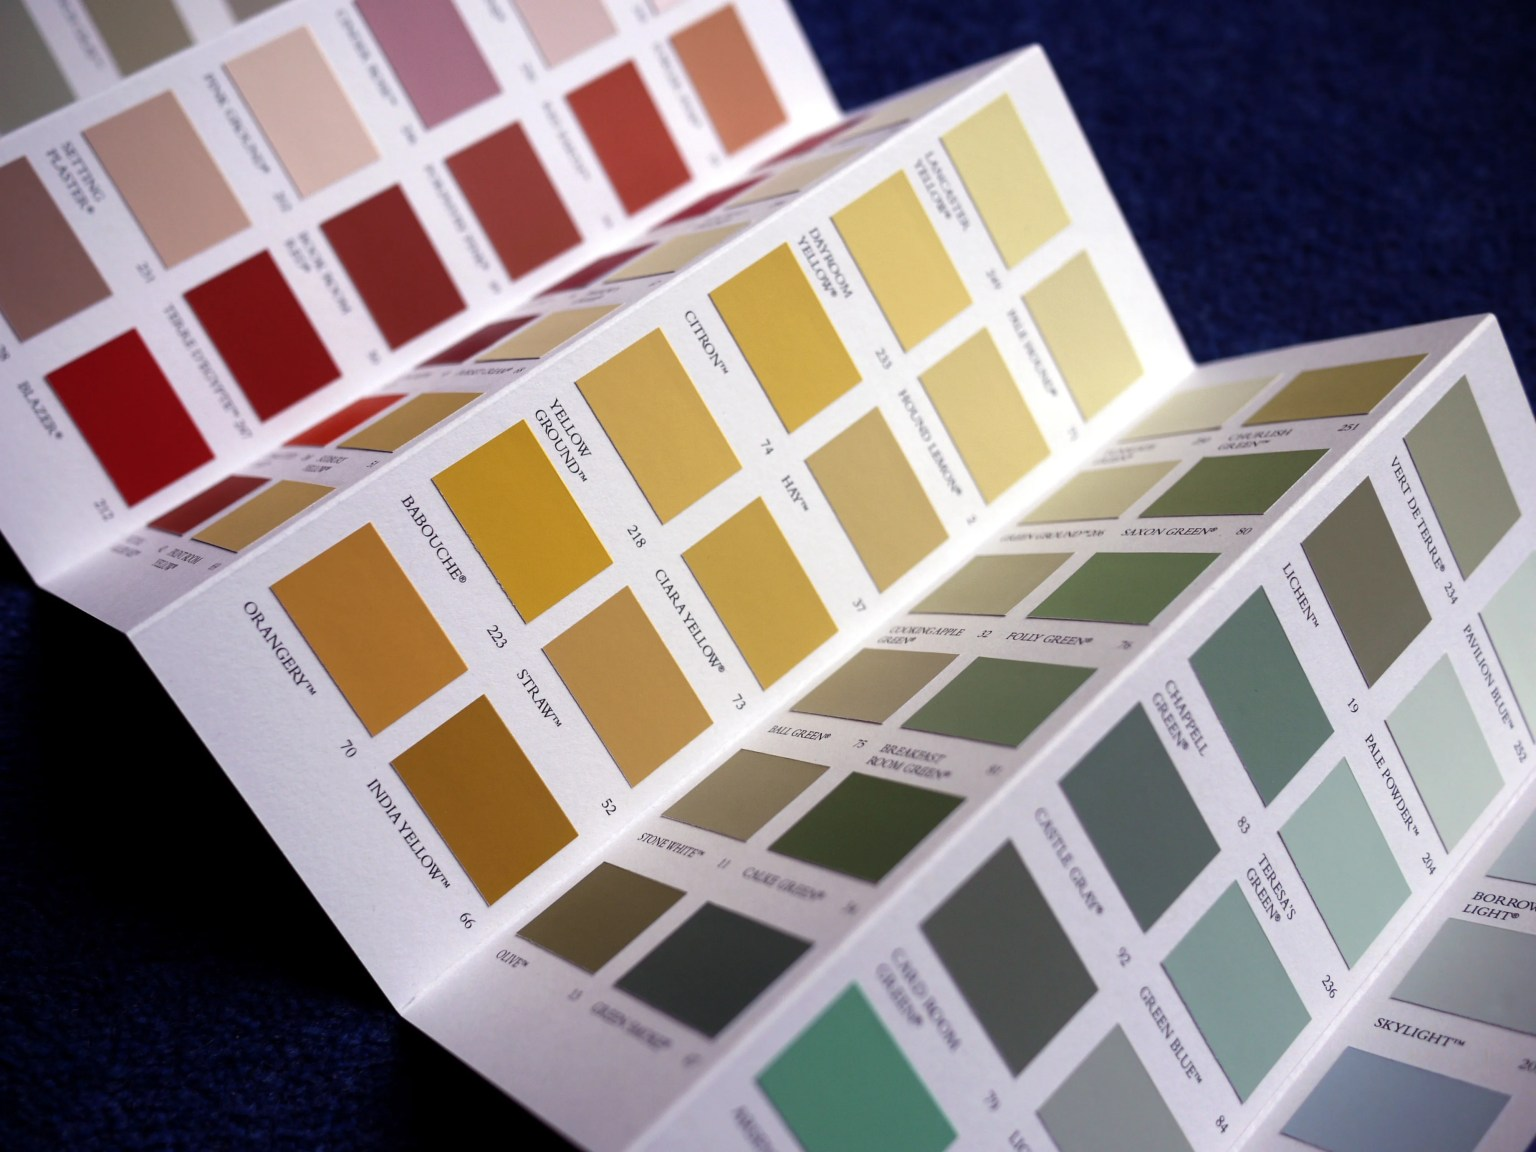 A paint color sample chart showing red, yellow and green colors, partially folded.